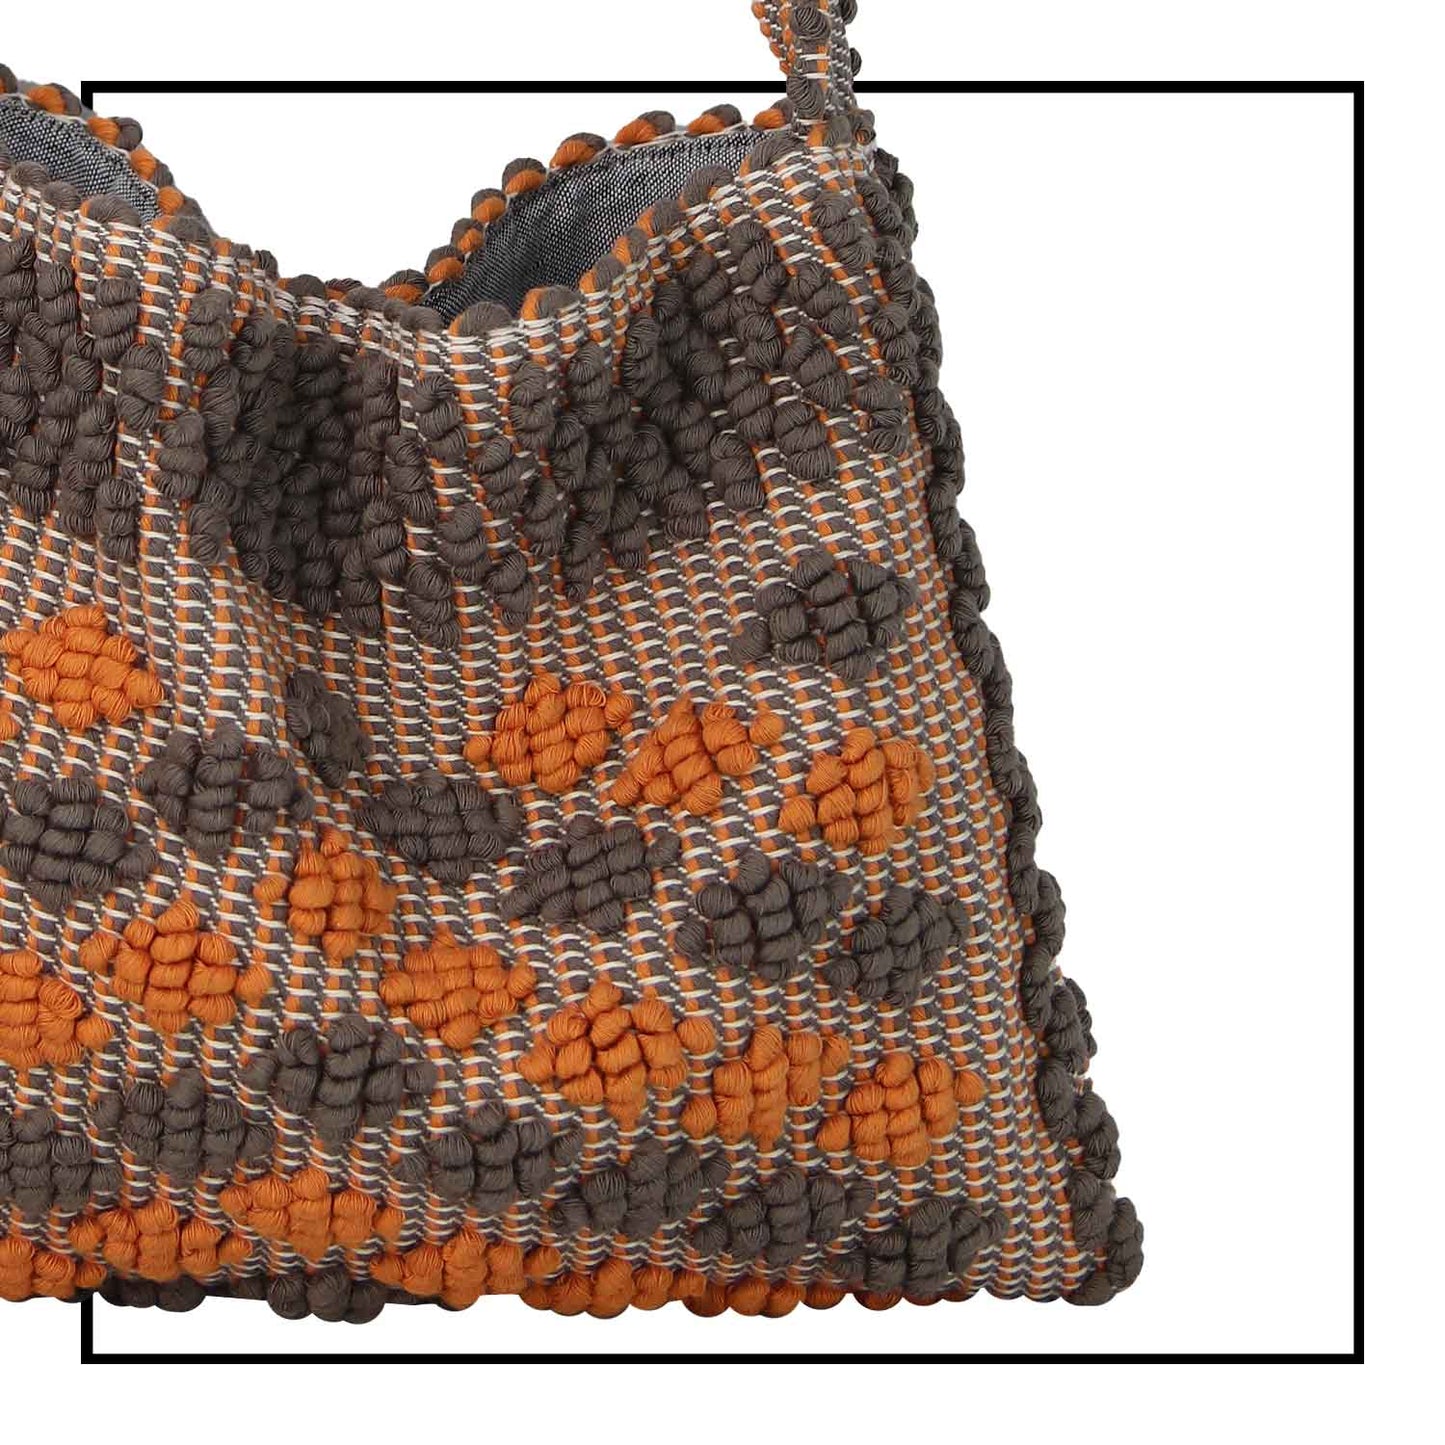 Close up fabric view of Quality eco-conscious hobo bag handwoven orange and taupe. Stylish clothes and Eco-Friendly with recycled yarns #luxury #ecoconcious #sustainablestyle  #ethicalbrands #ecoliving  #ecofashion #ecostyle #ethicalhandbags #handbags #sustainablelifestyle #ethicalfashion #sustainability